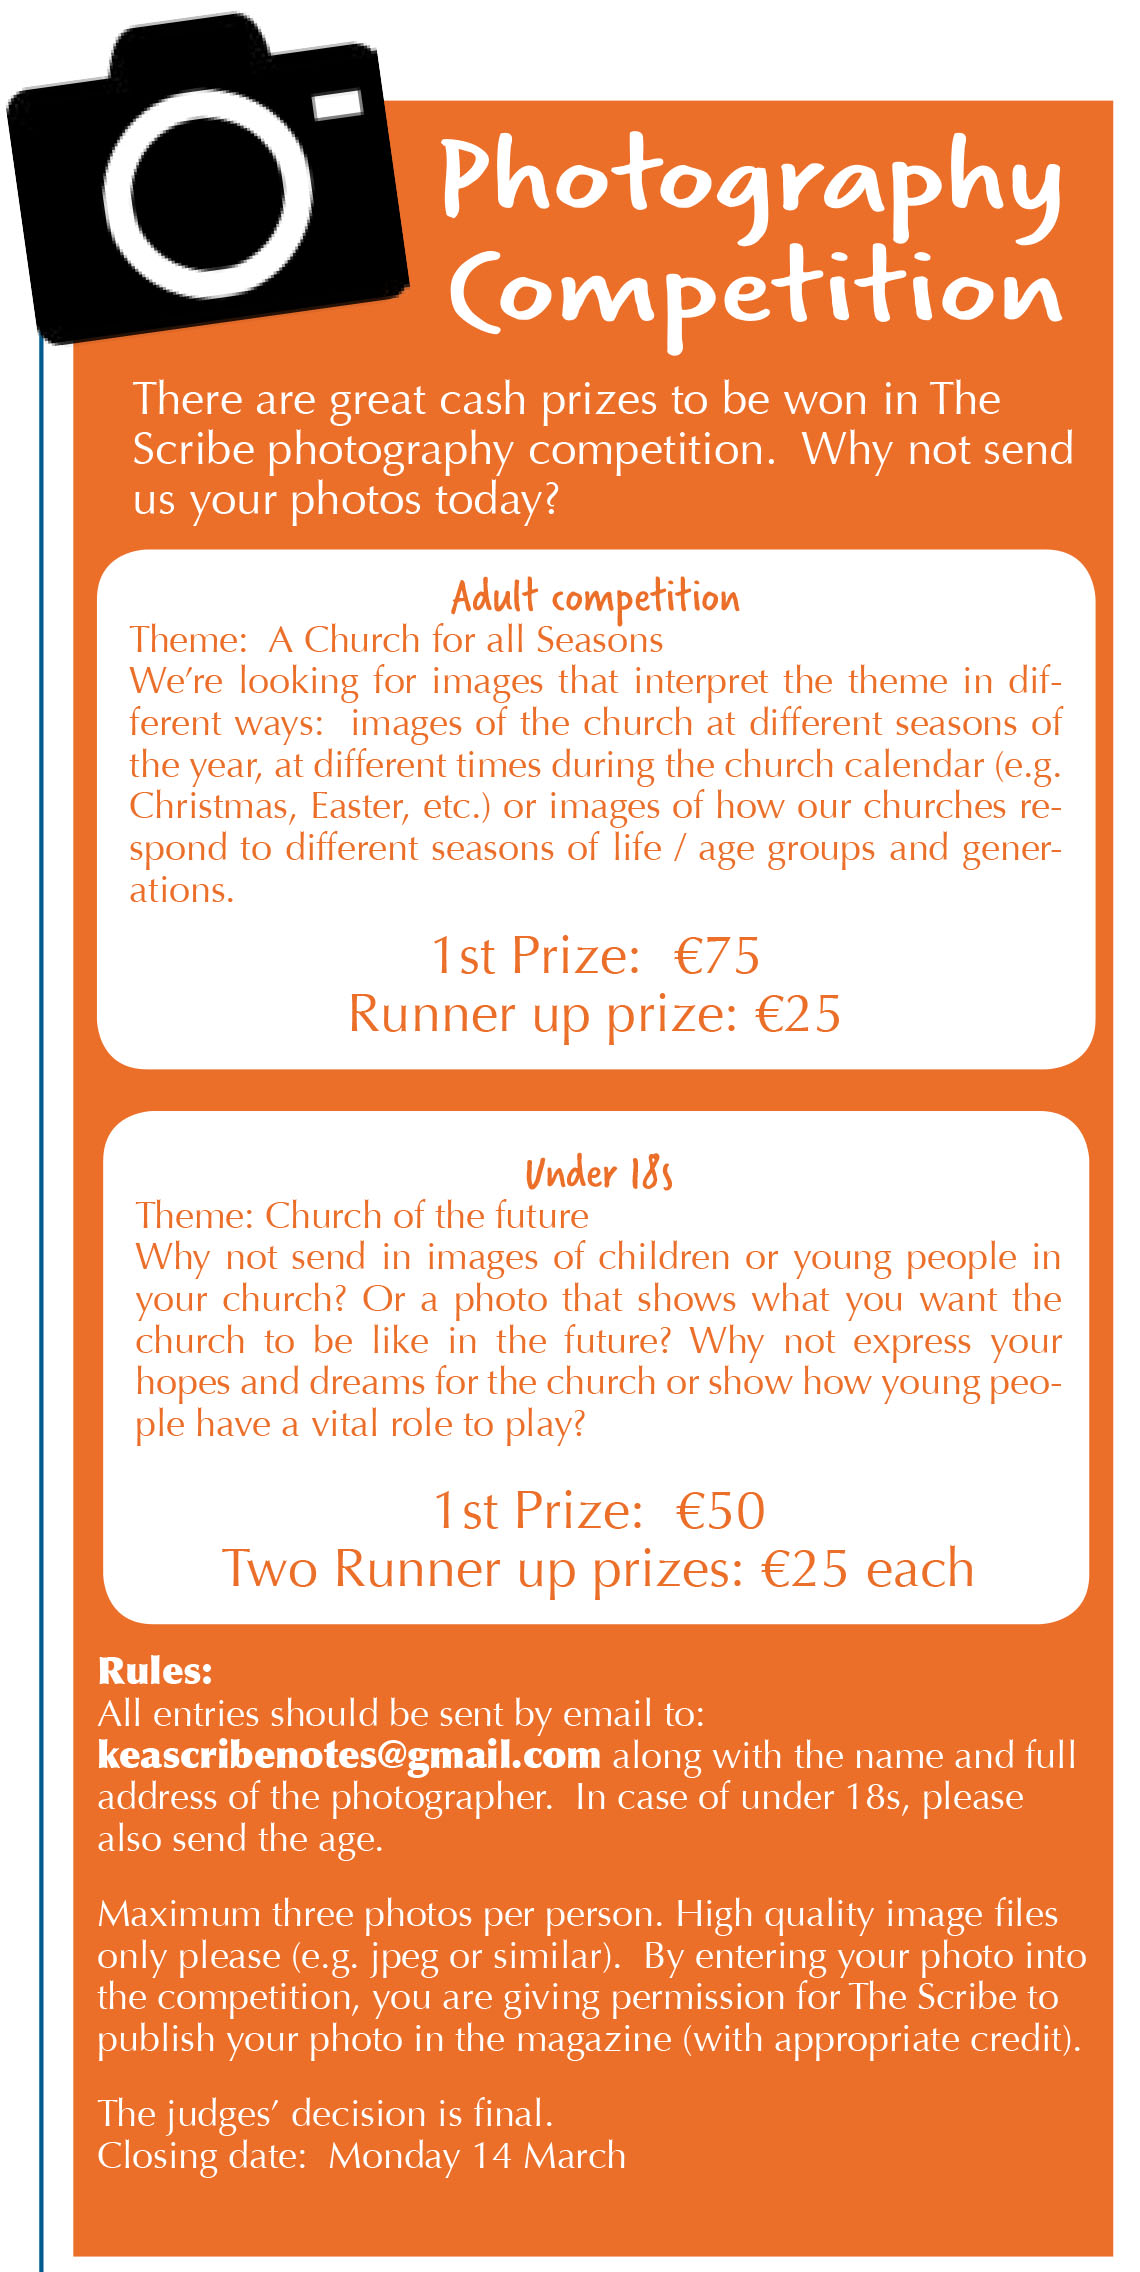 There are great cash prizes to be won in The Scribe photography competition. Why not send us your photos today?